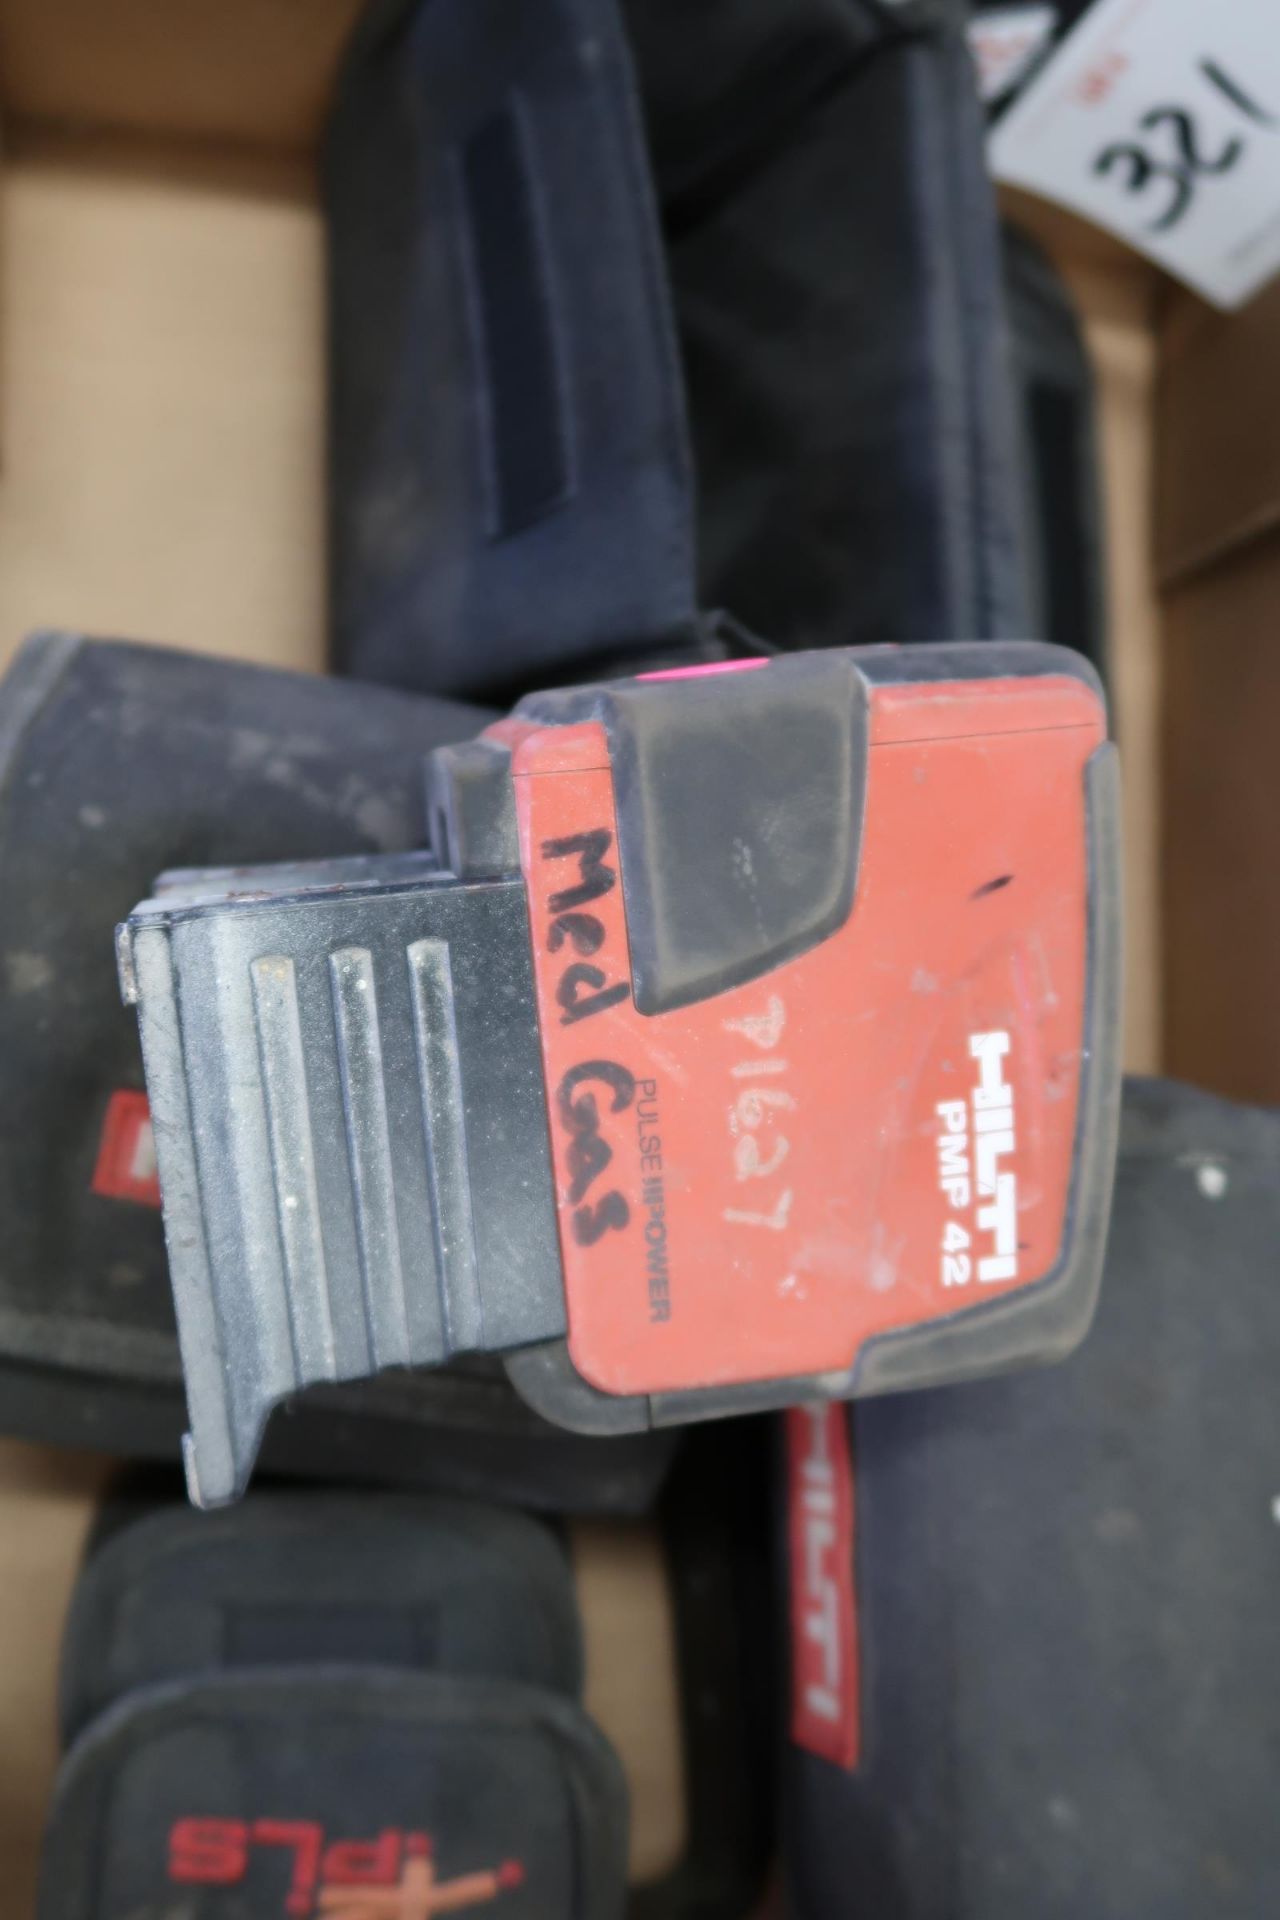 Hilti PMP45, PMP42, PMP32 and PLS2 Laser Levels (4) (SOLD AS-IS - NO WARRANTY) - Image 2 of 2